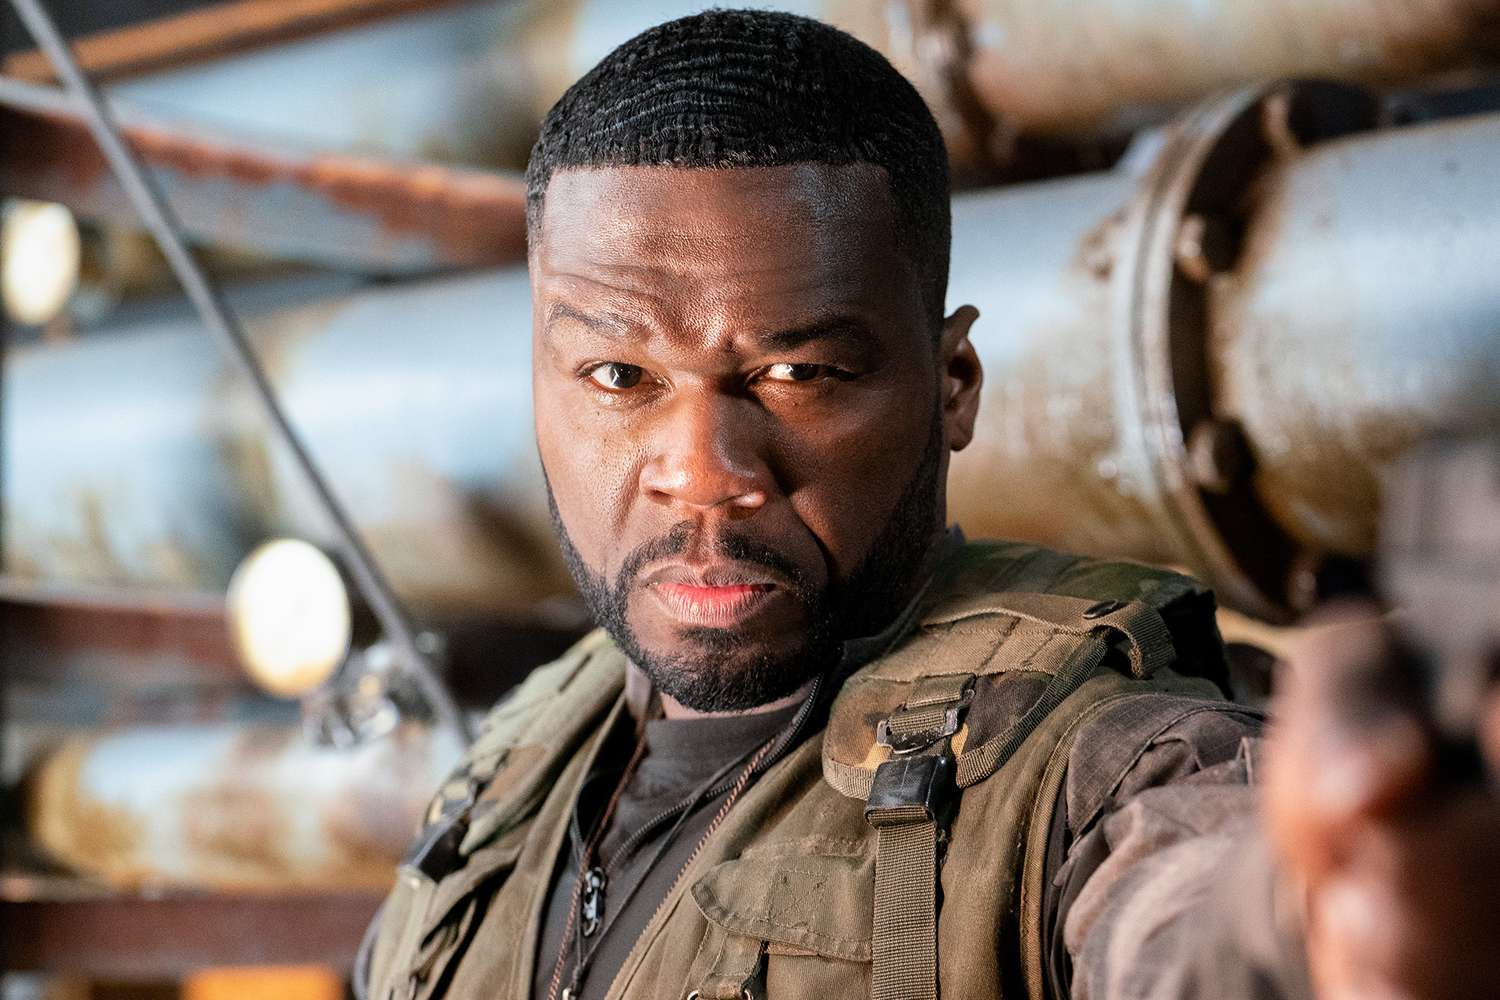 Curtis '50 Cent' Jackson as Easy Day in 'Expendables 4'